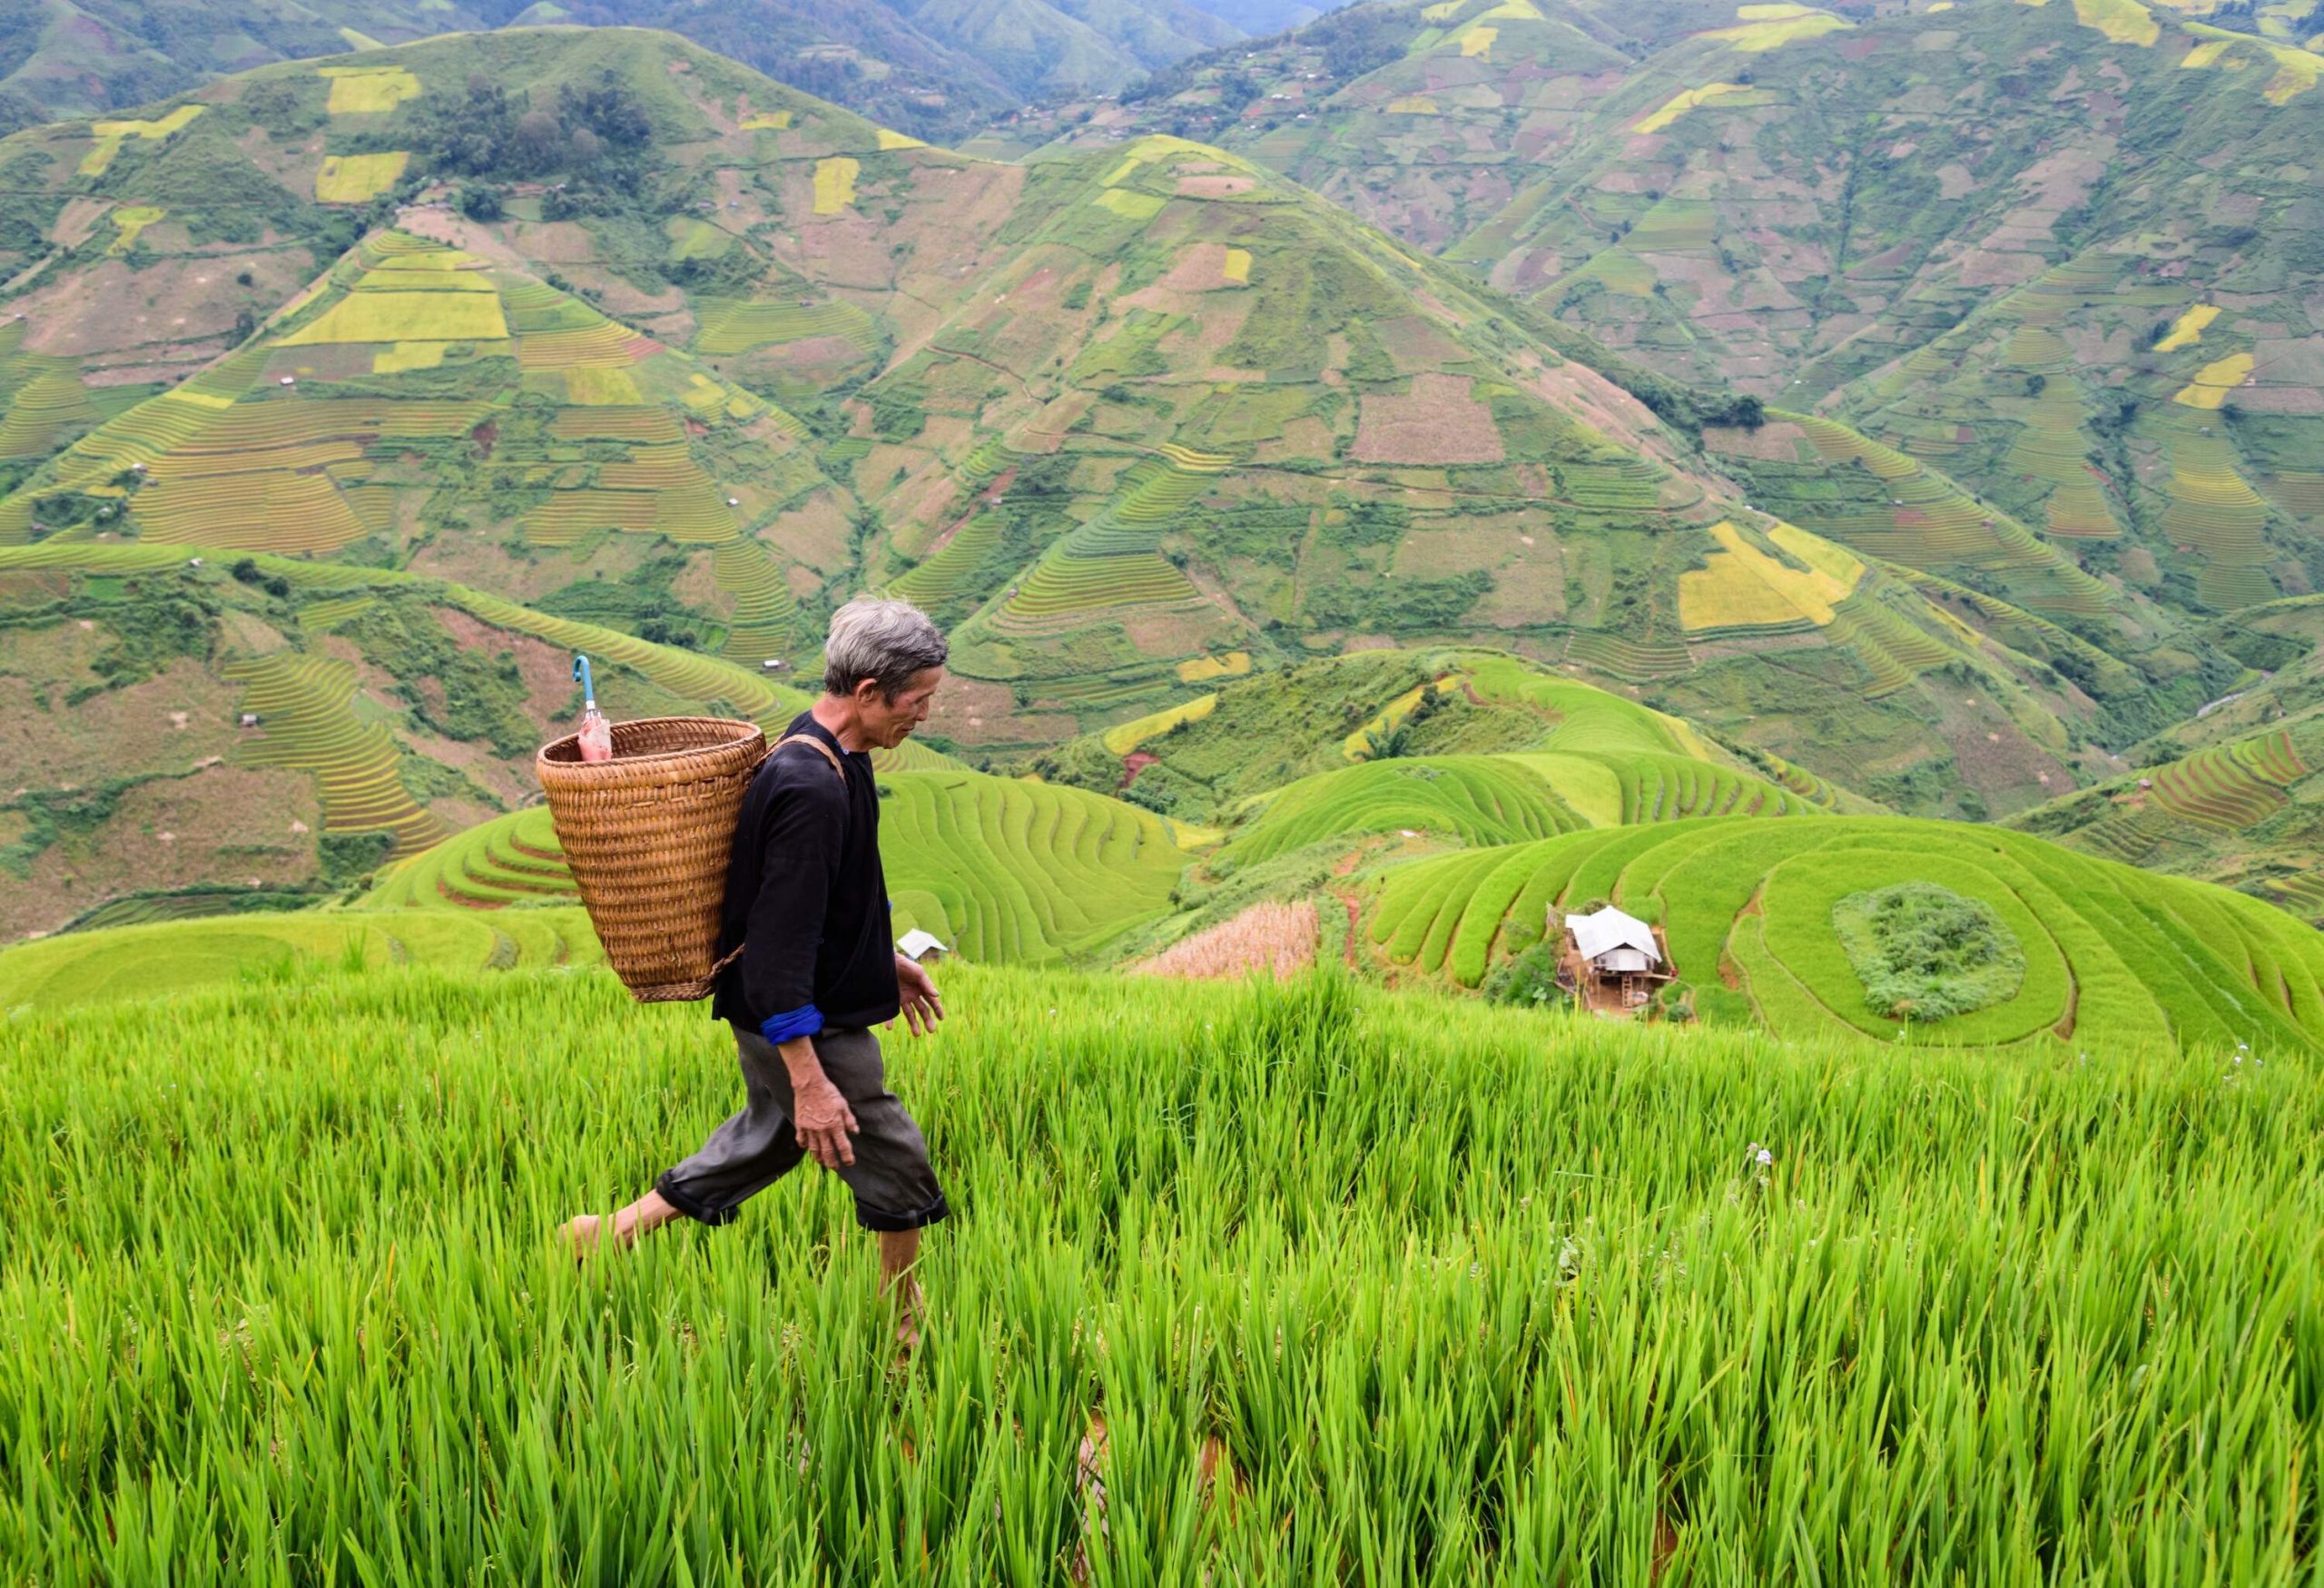 A senior farmer walks on the lush terraced rice fields carrying a basket on his back.